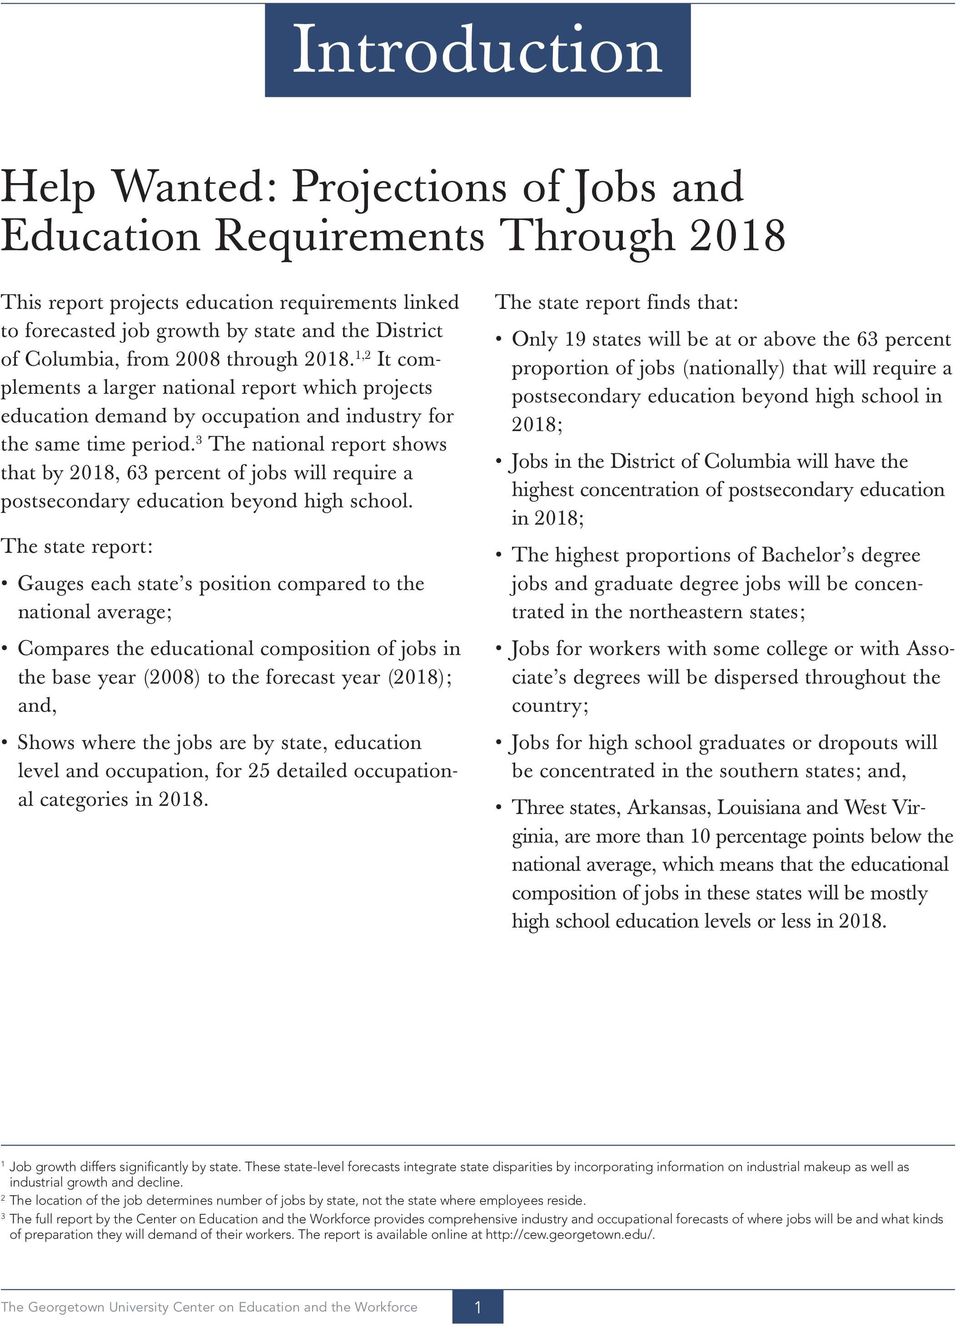 3 The national report shows that by 2018, 63 percent of jobs will require a postsecondary education beyond high school.